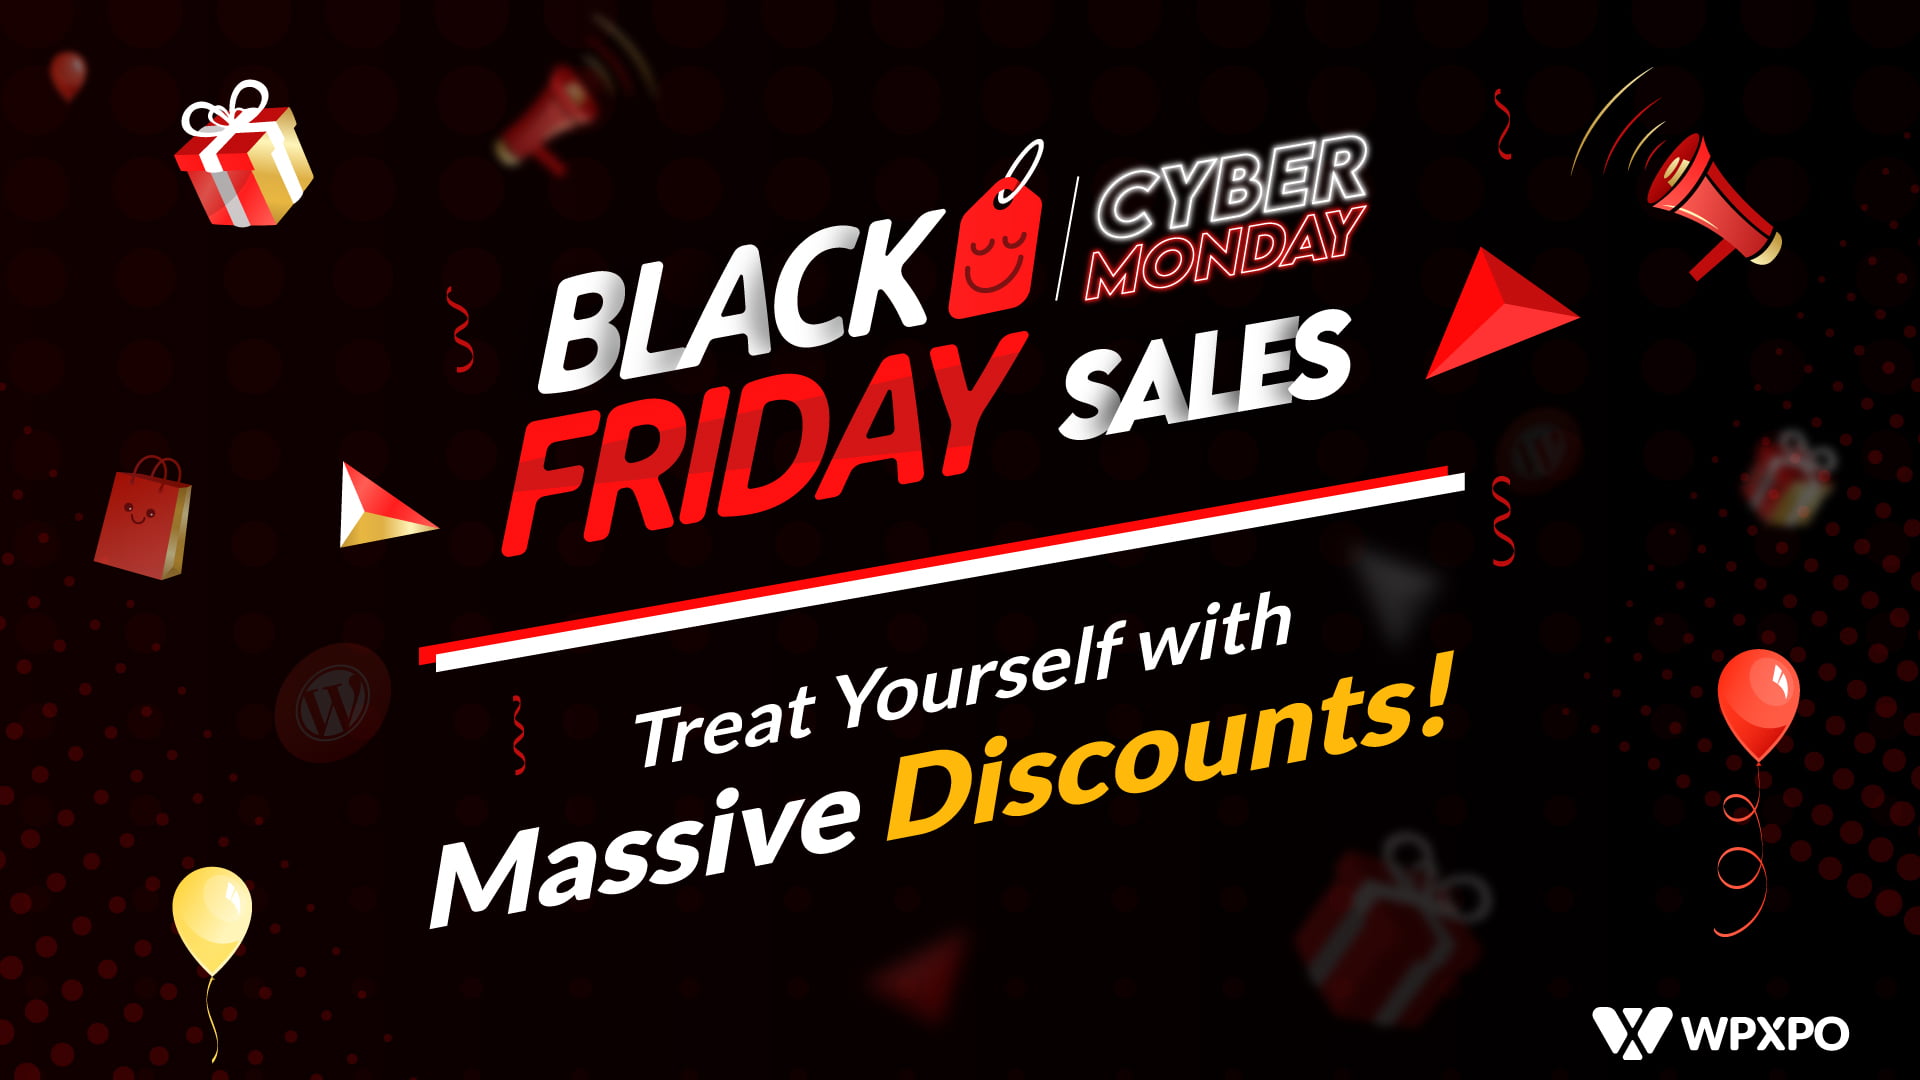 Black_Friday_Cyber_Monday_Discounts